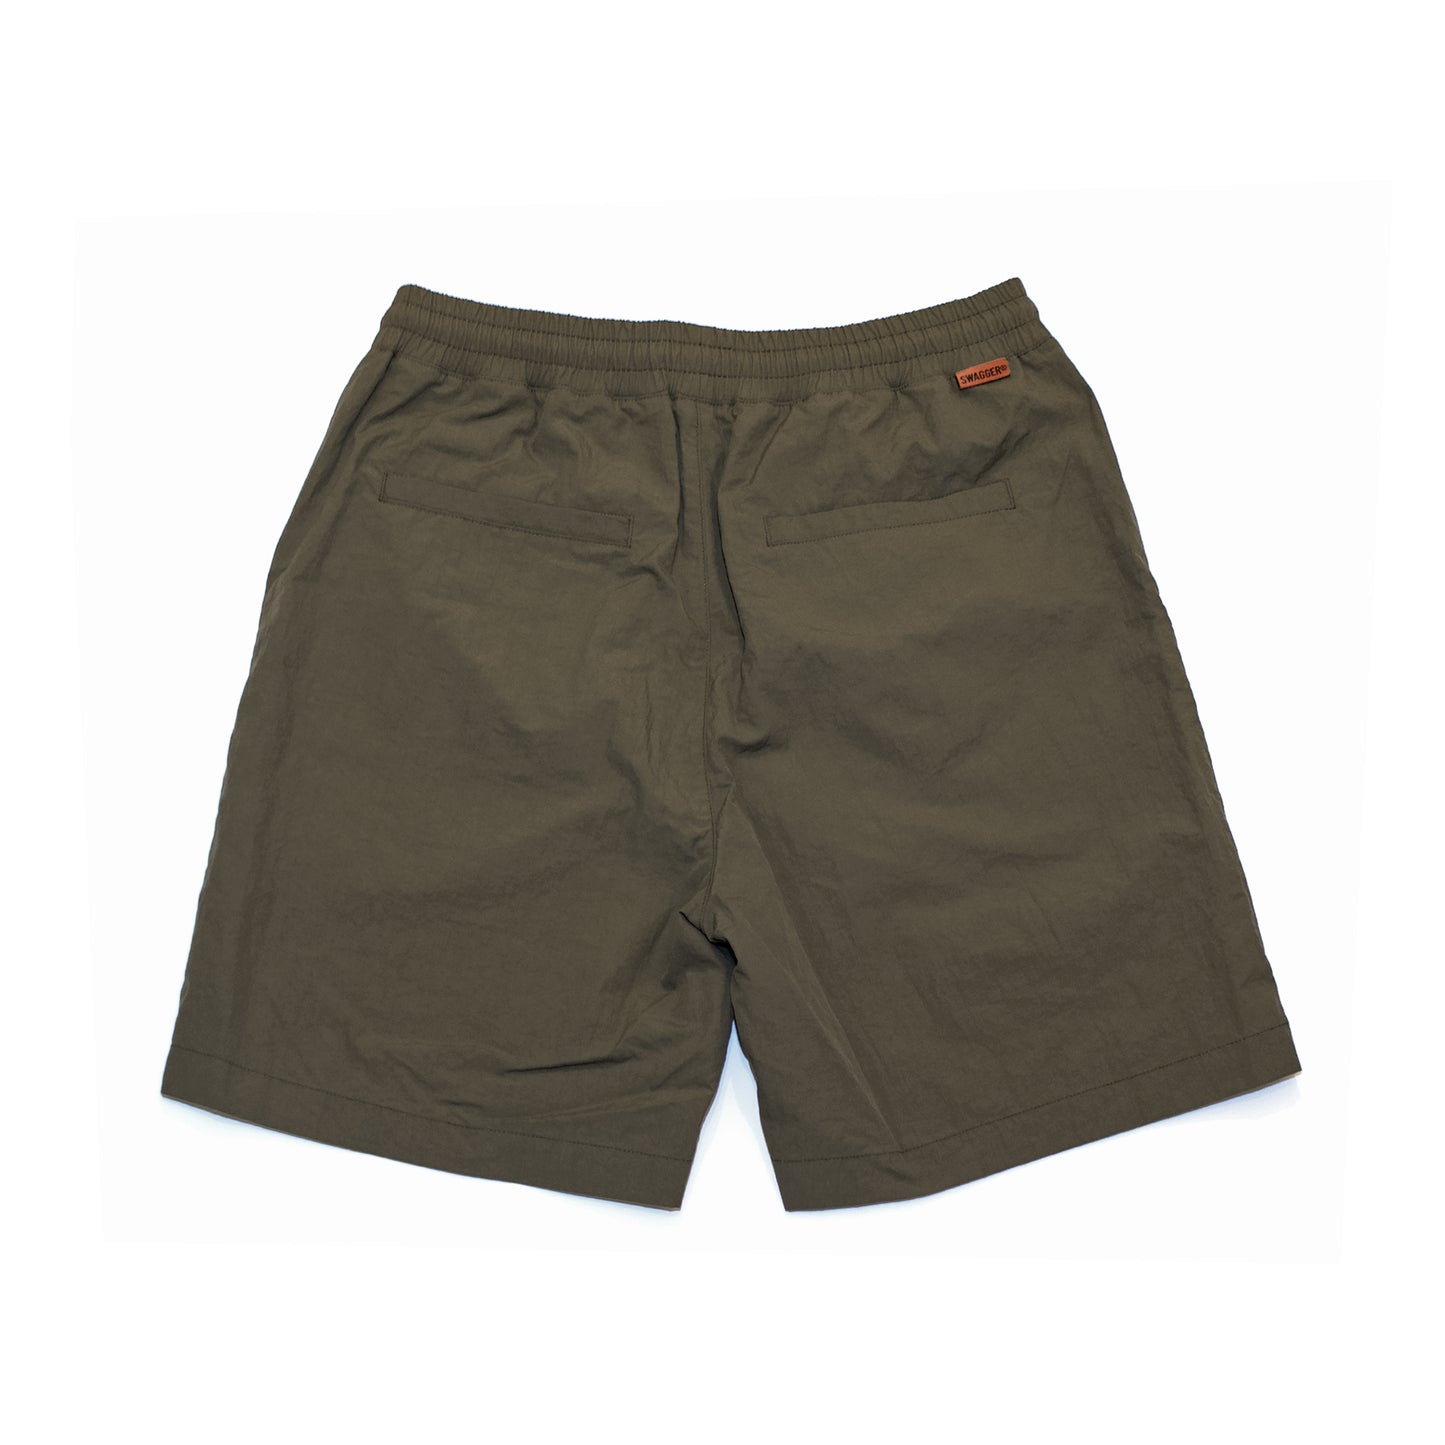 SWAGGER Water Repellent Shorts KHA